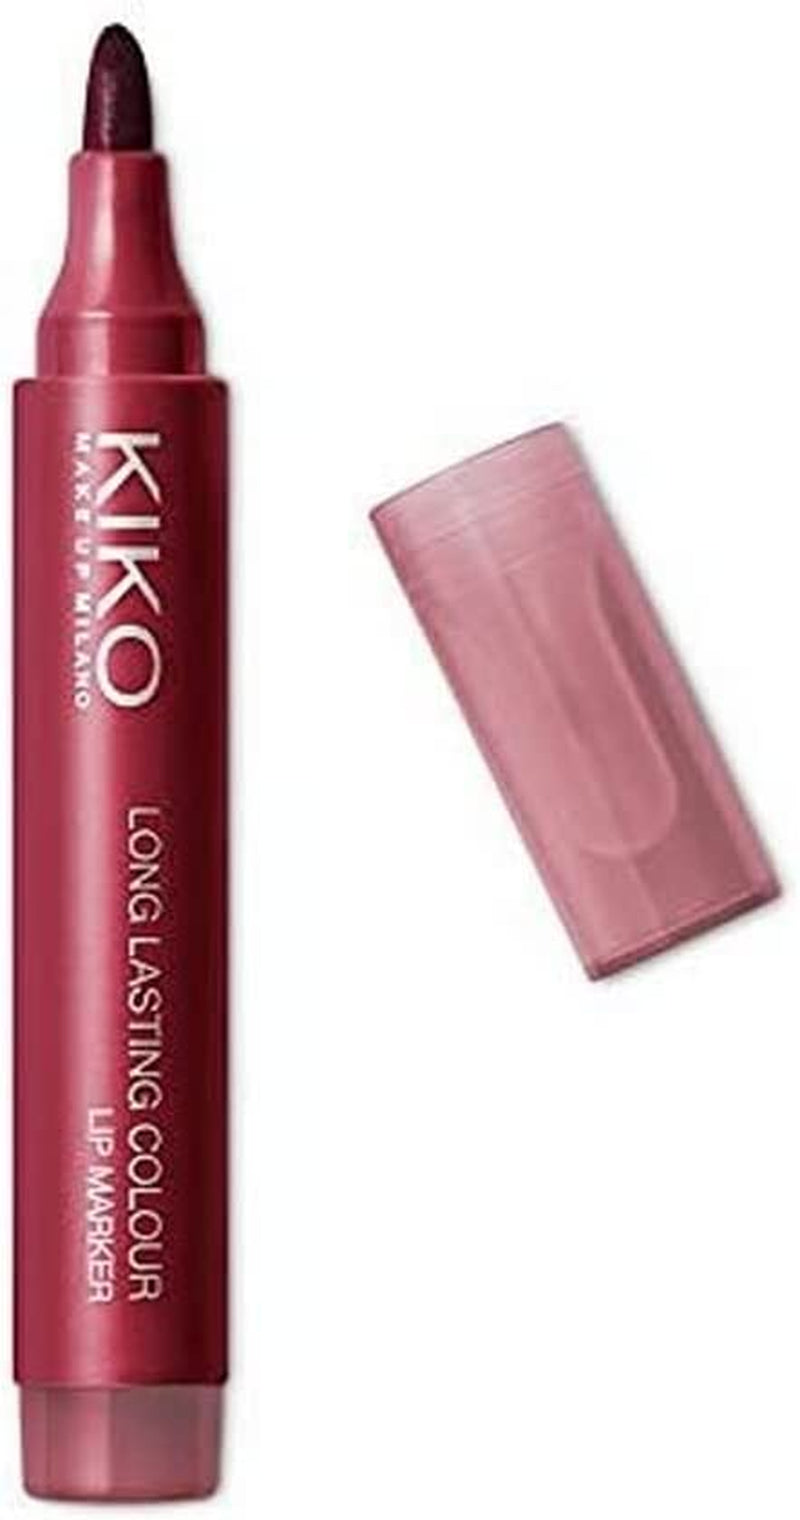 KIKO Milano Long Lasting Colour Lip Marker 106 | No Transfer Lip Marker with a Natural Tattoo Effect and Extremely Long-Lasting Wear (10 Hours)